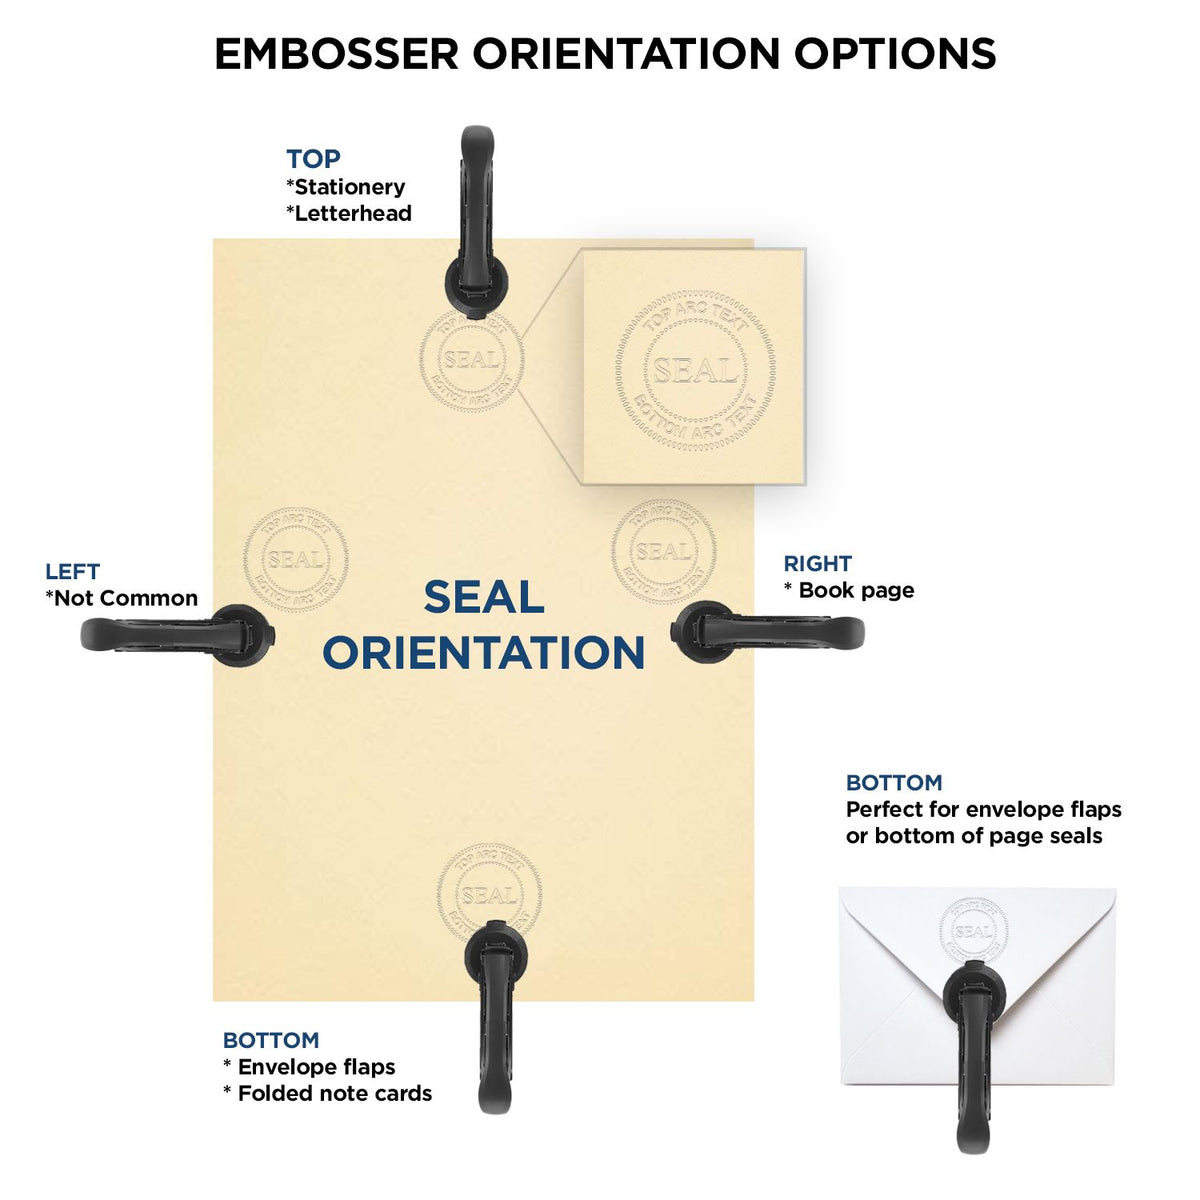 An infographic for the Handheld Nebraska Professional Engineer Embosser showing embosser orientation, this is showing examples of a top, bottom, right and left insert.